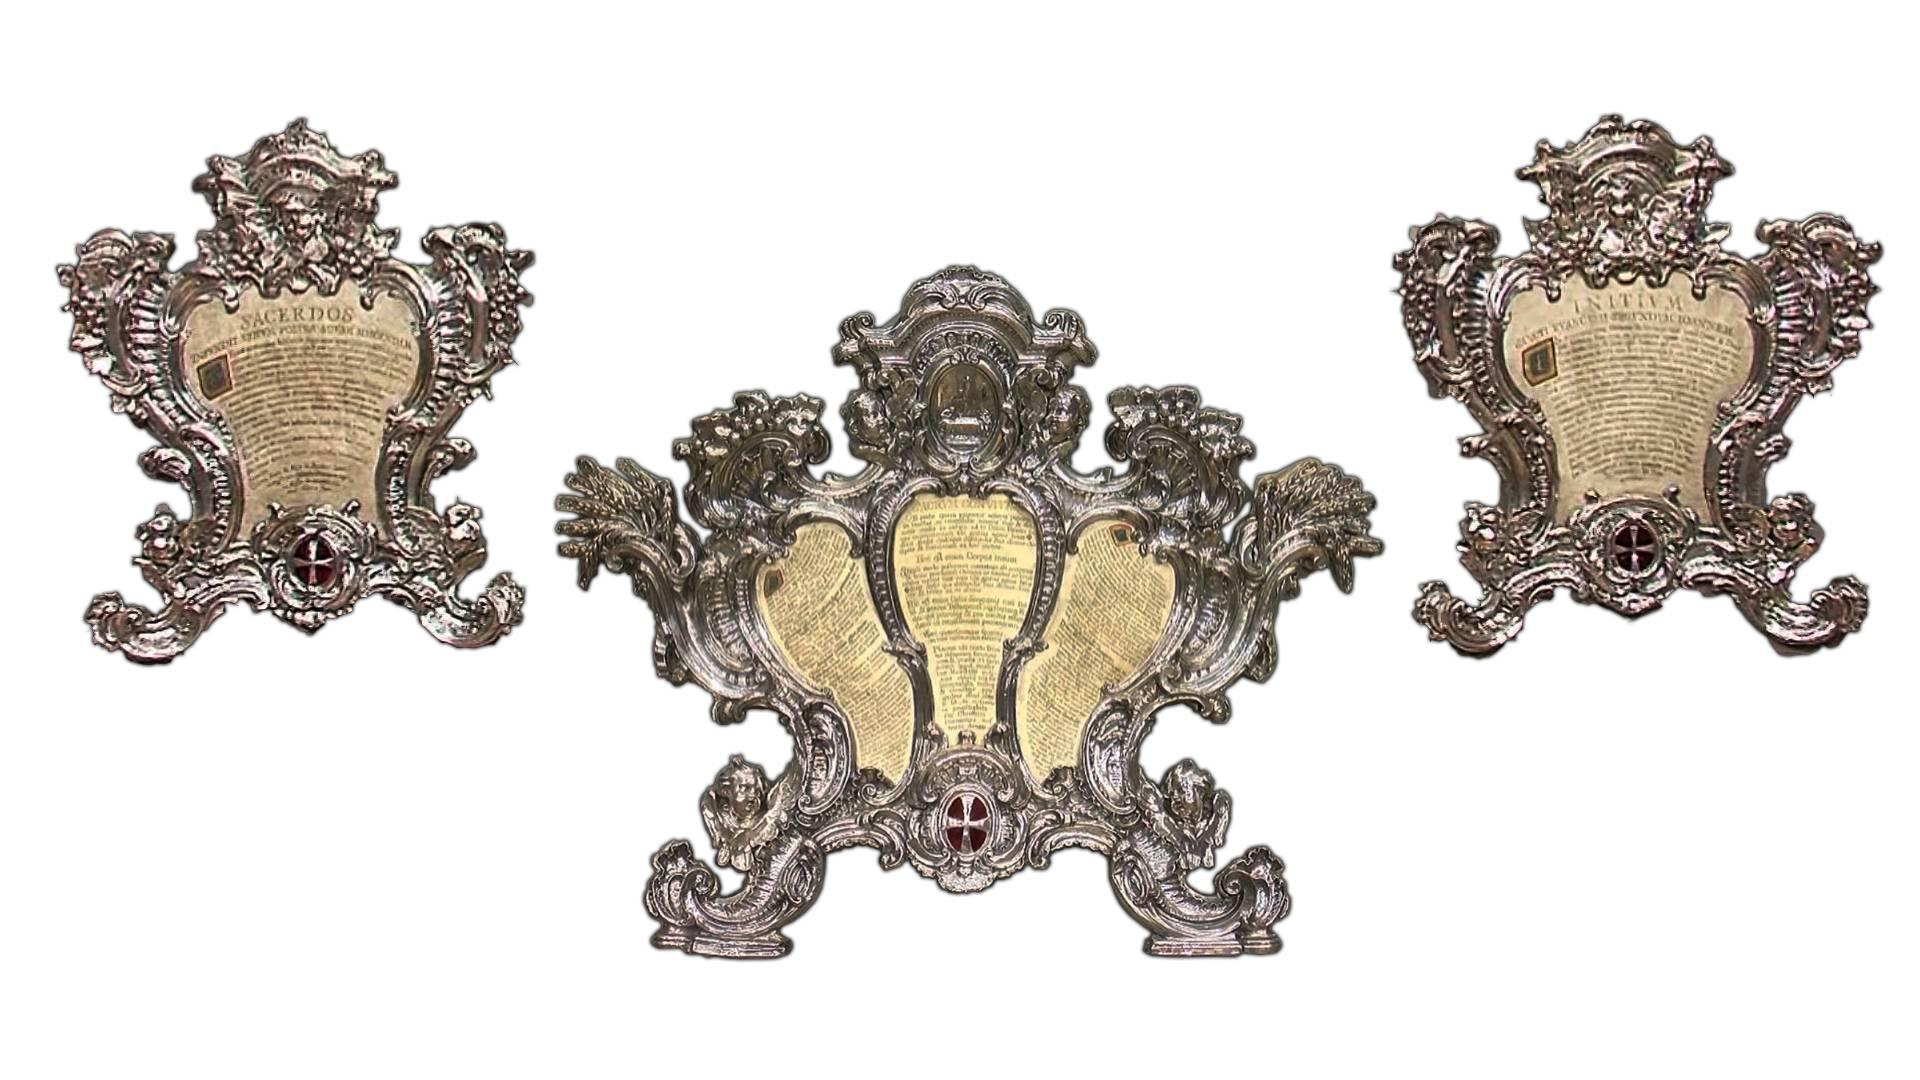 Extremely rare set of silver cartagloria (three pieces) by Roman master jeweller Luigi Valadier.
Rome, circa 1760.

Centrepiece: 94 x 76cm.
Side pieces: 55 x 60 cm each.

A cartagloria (pl. carteglorie) is a liturgical object used in the